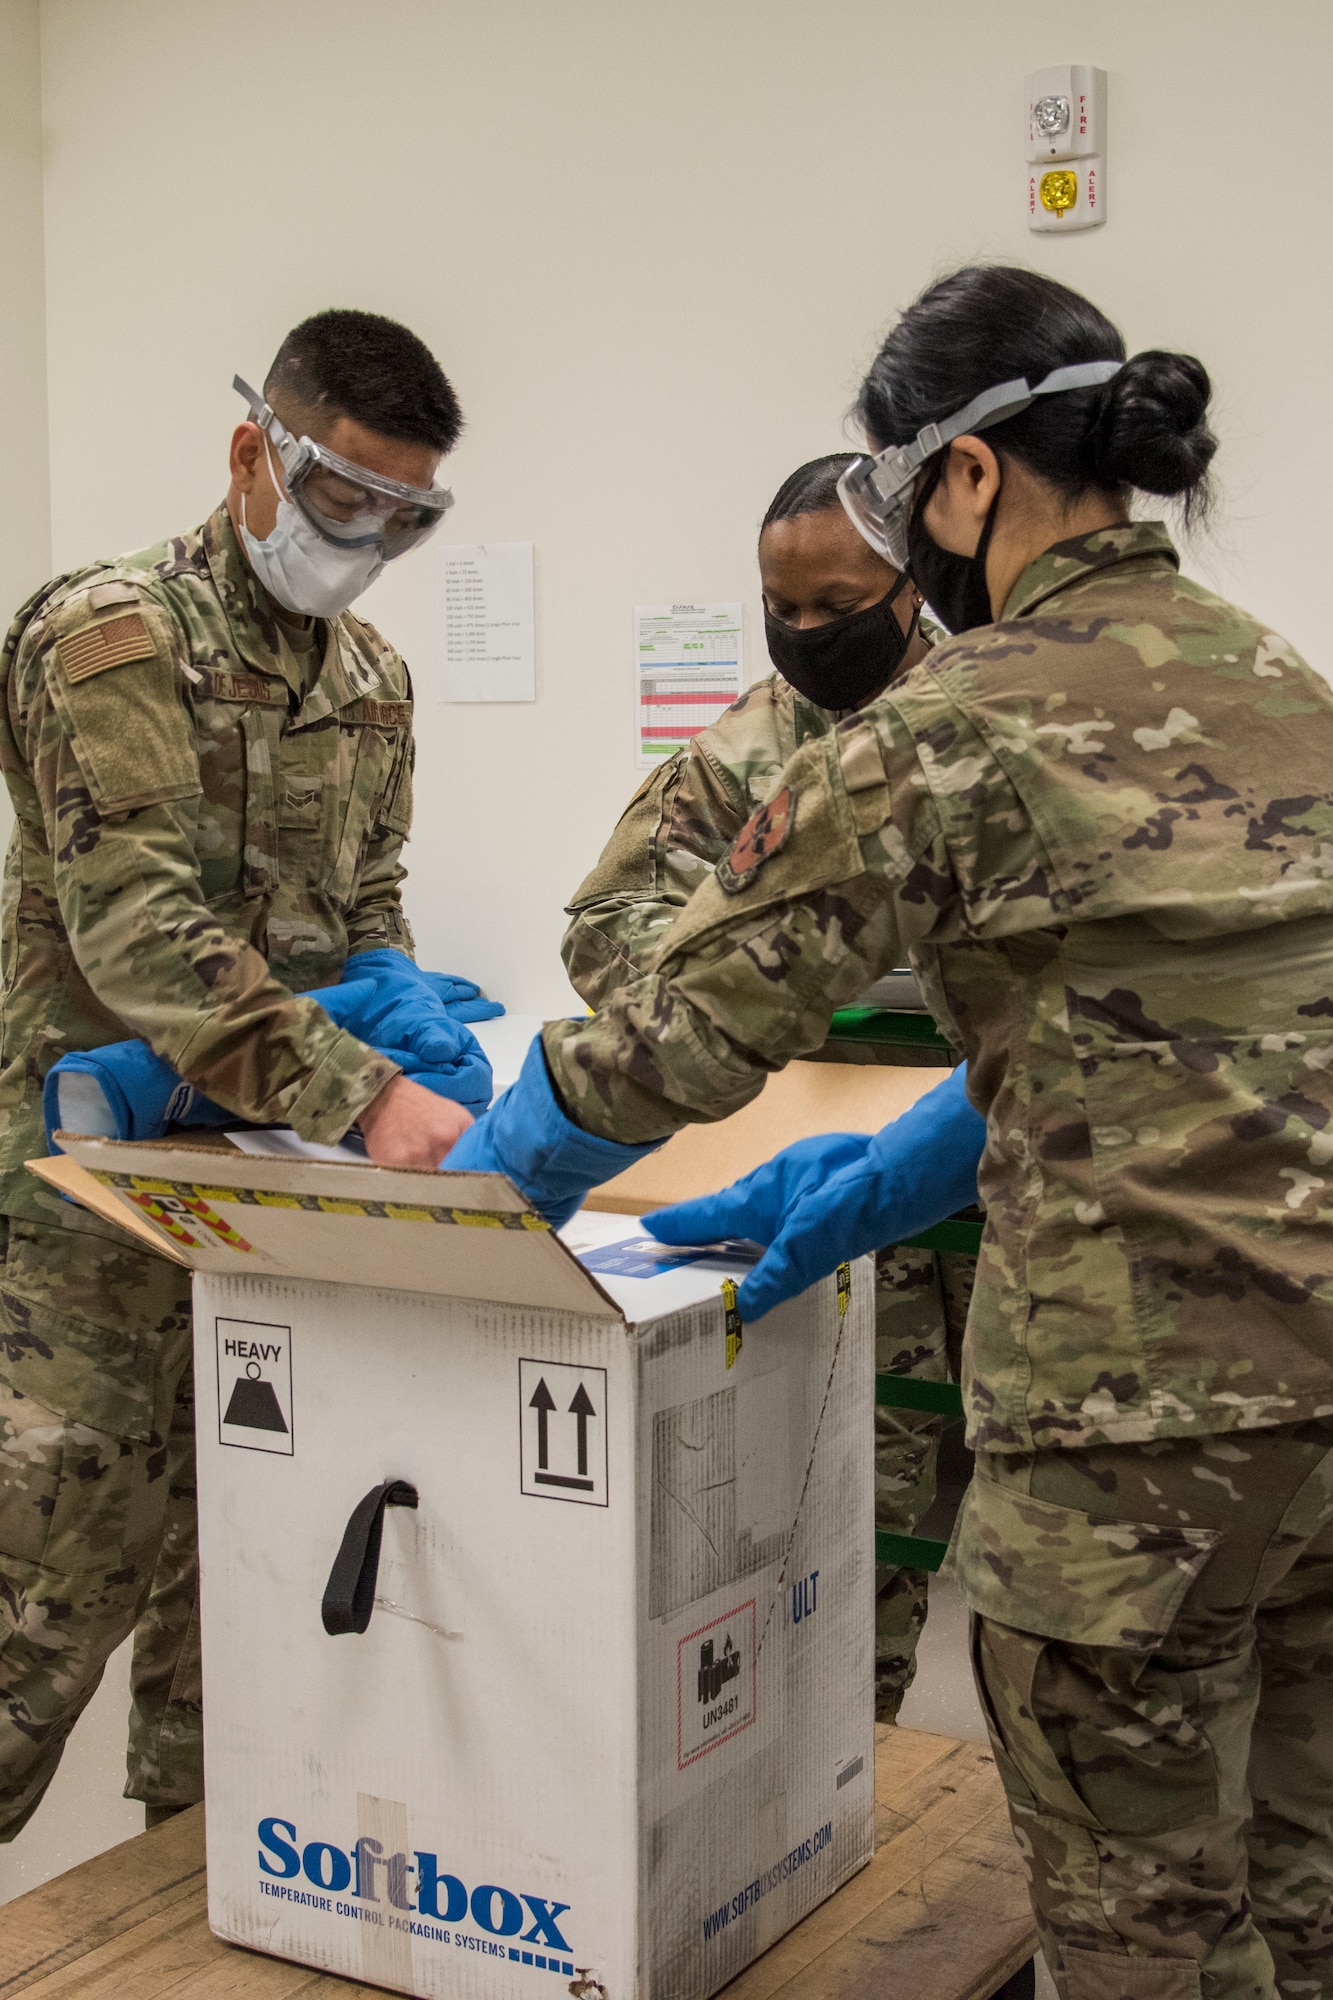 The Department of Defense aims to be able to reduce the burden of the COVID-19 disease in high-risk populations and simultaneously mitigate risk to military operations.